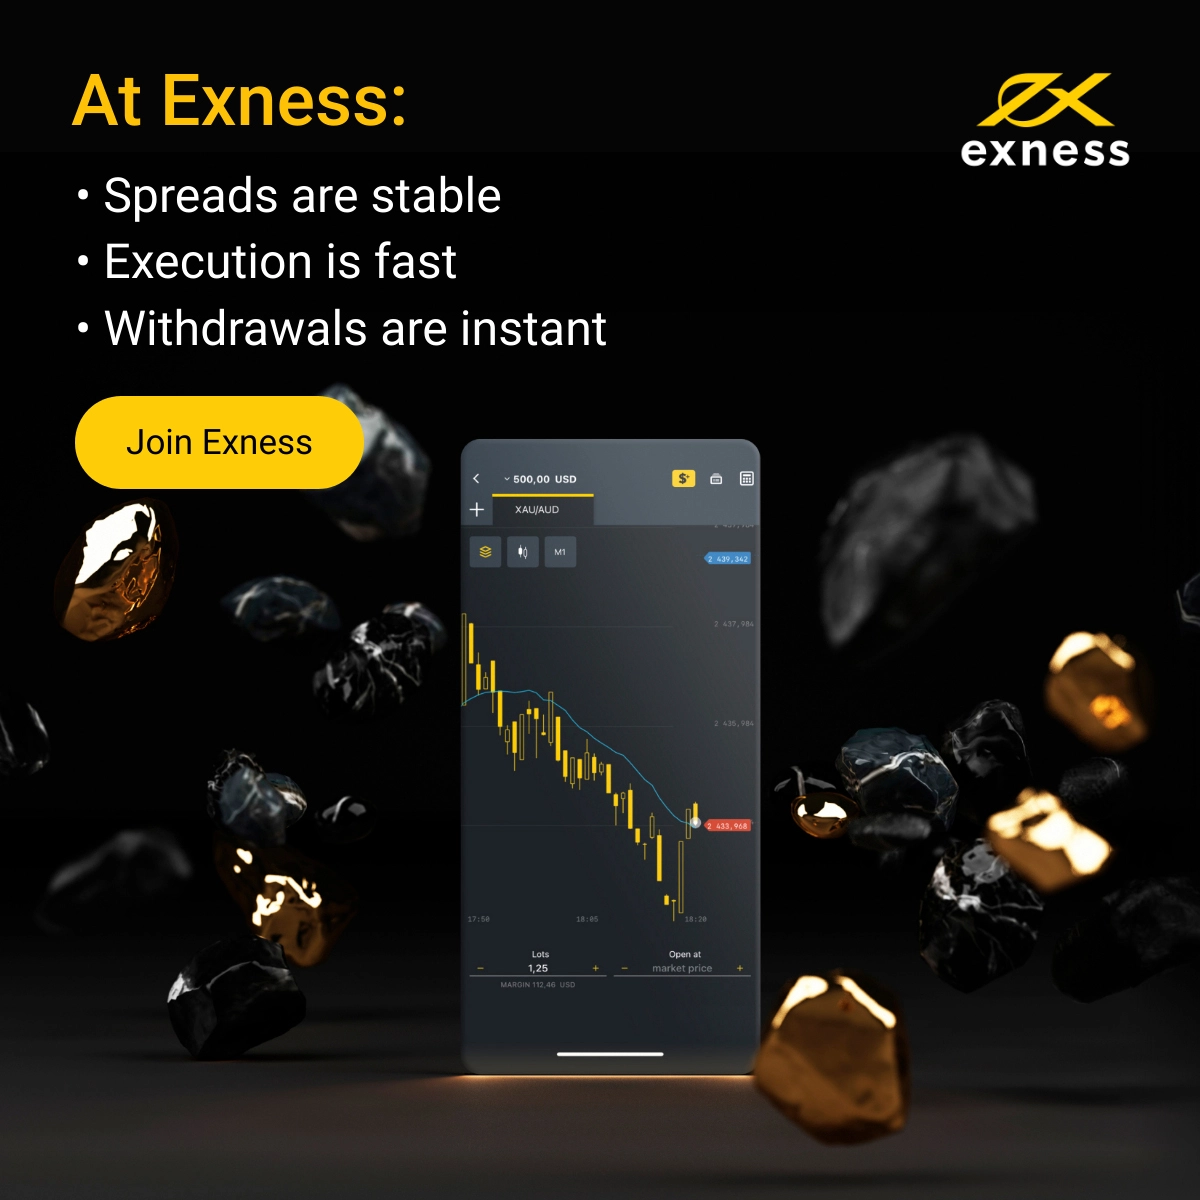 Read This Controversial Article And Find Out More About Exness